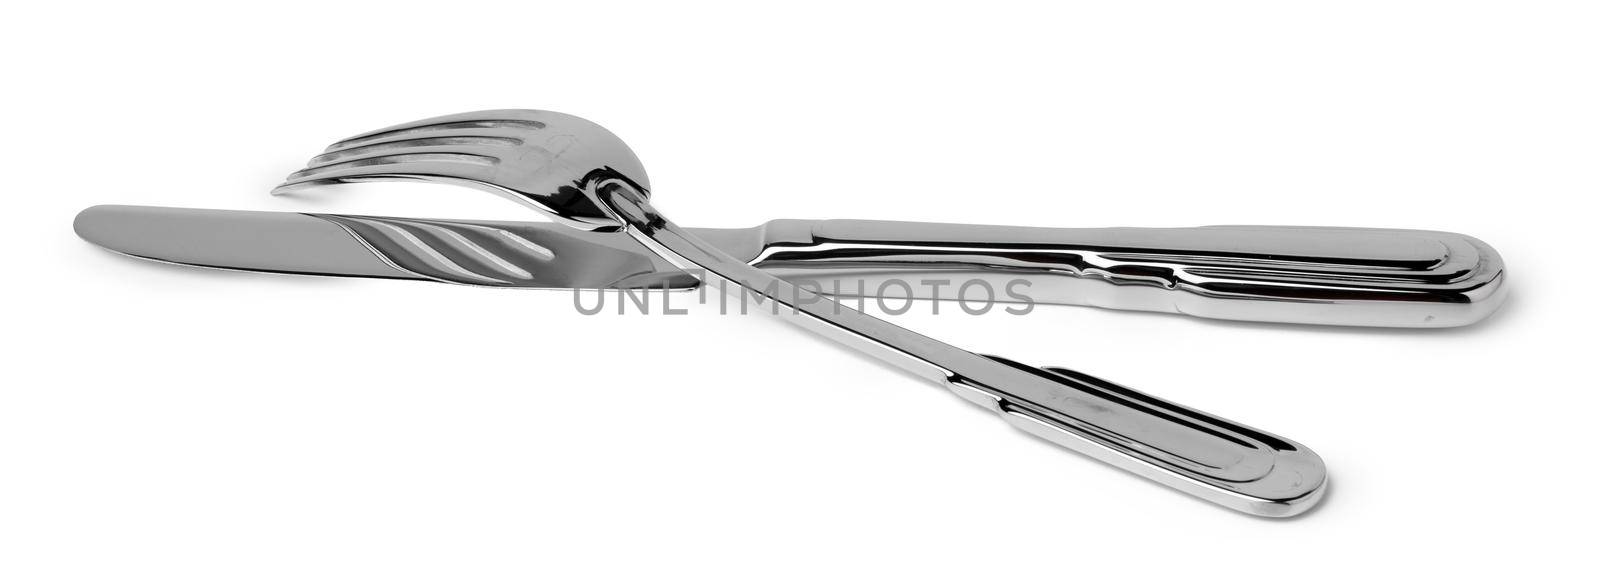 Set of new cutlery isolated on white background by Fabrikasimf